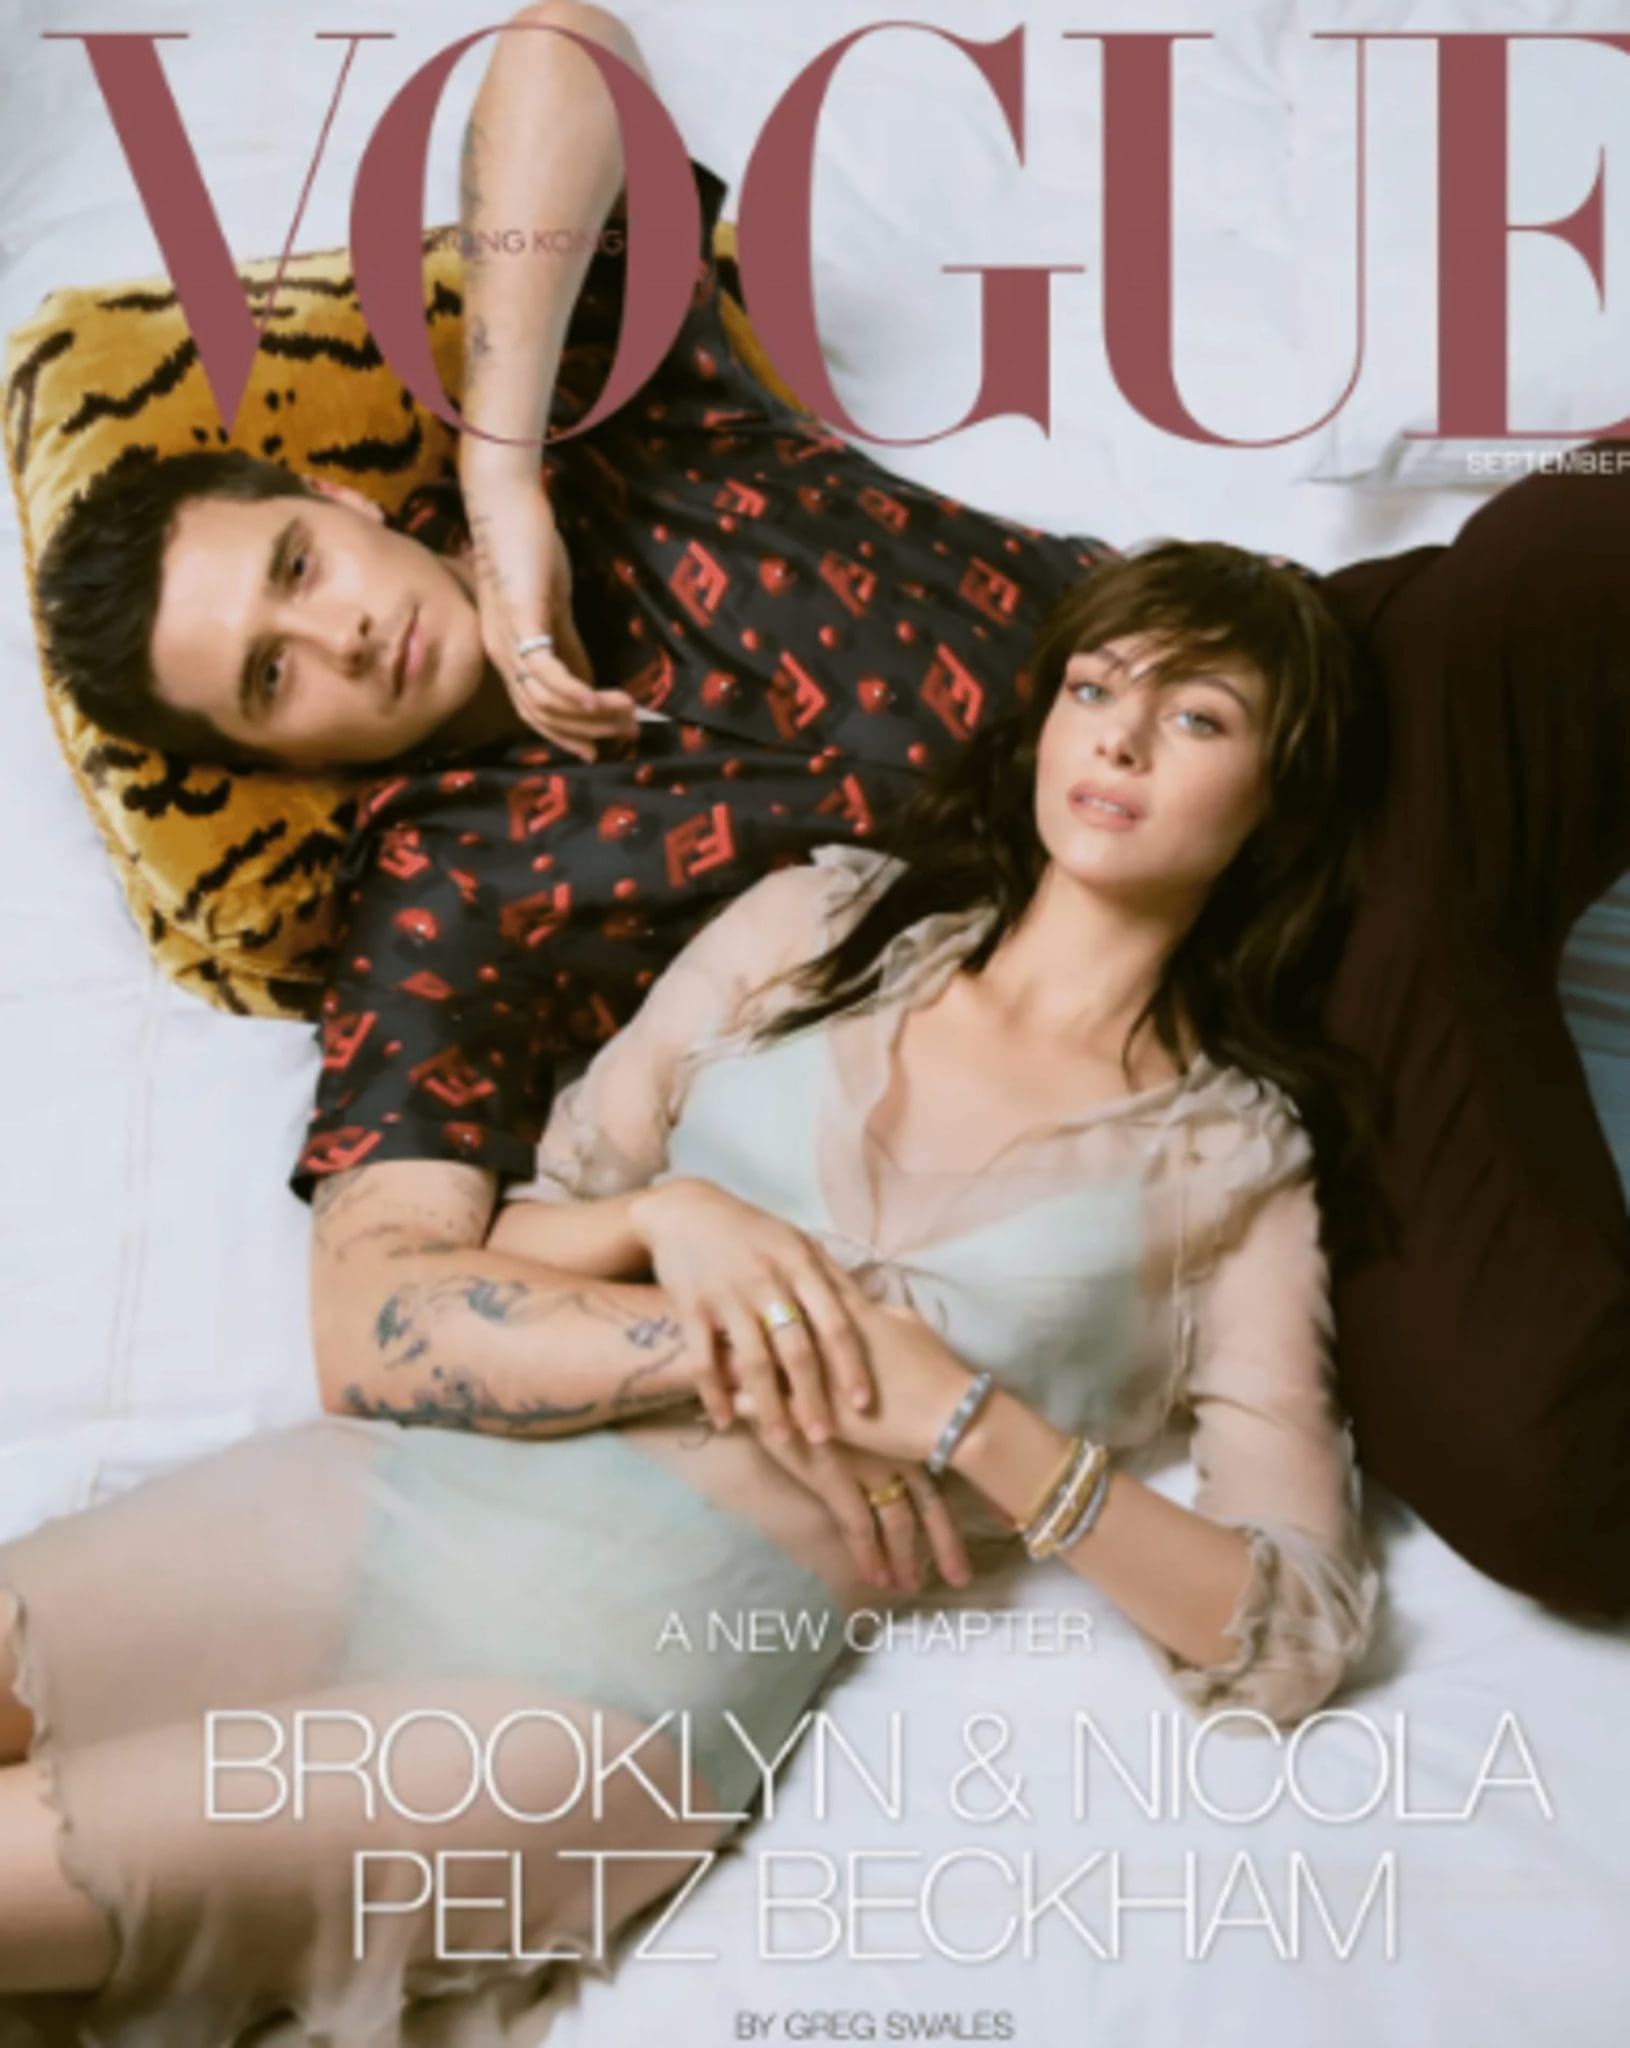 In The Most Recent Issue Of Vogue Hong Kong, Brooklyn Beckham And Nicola Peltz Talked About Their Relationship